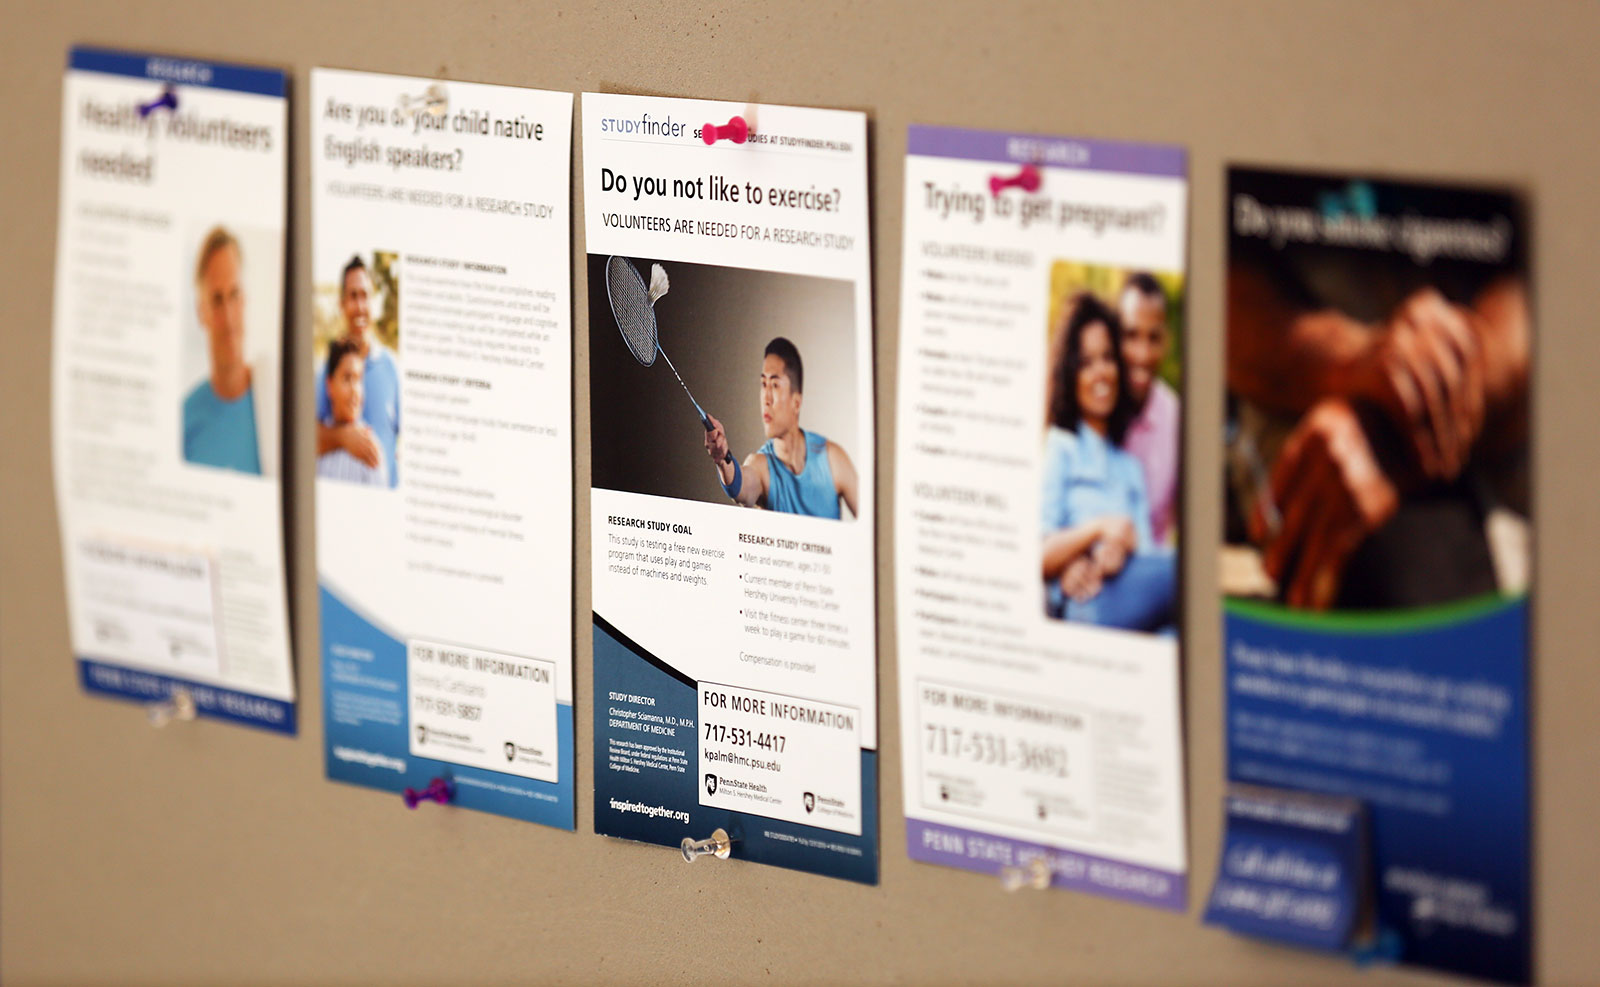 Posters depicting Penn State College of Medicine clinical trials that are seeking volunteers are displayed on a bulletin board.